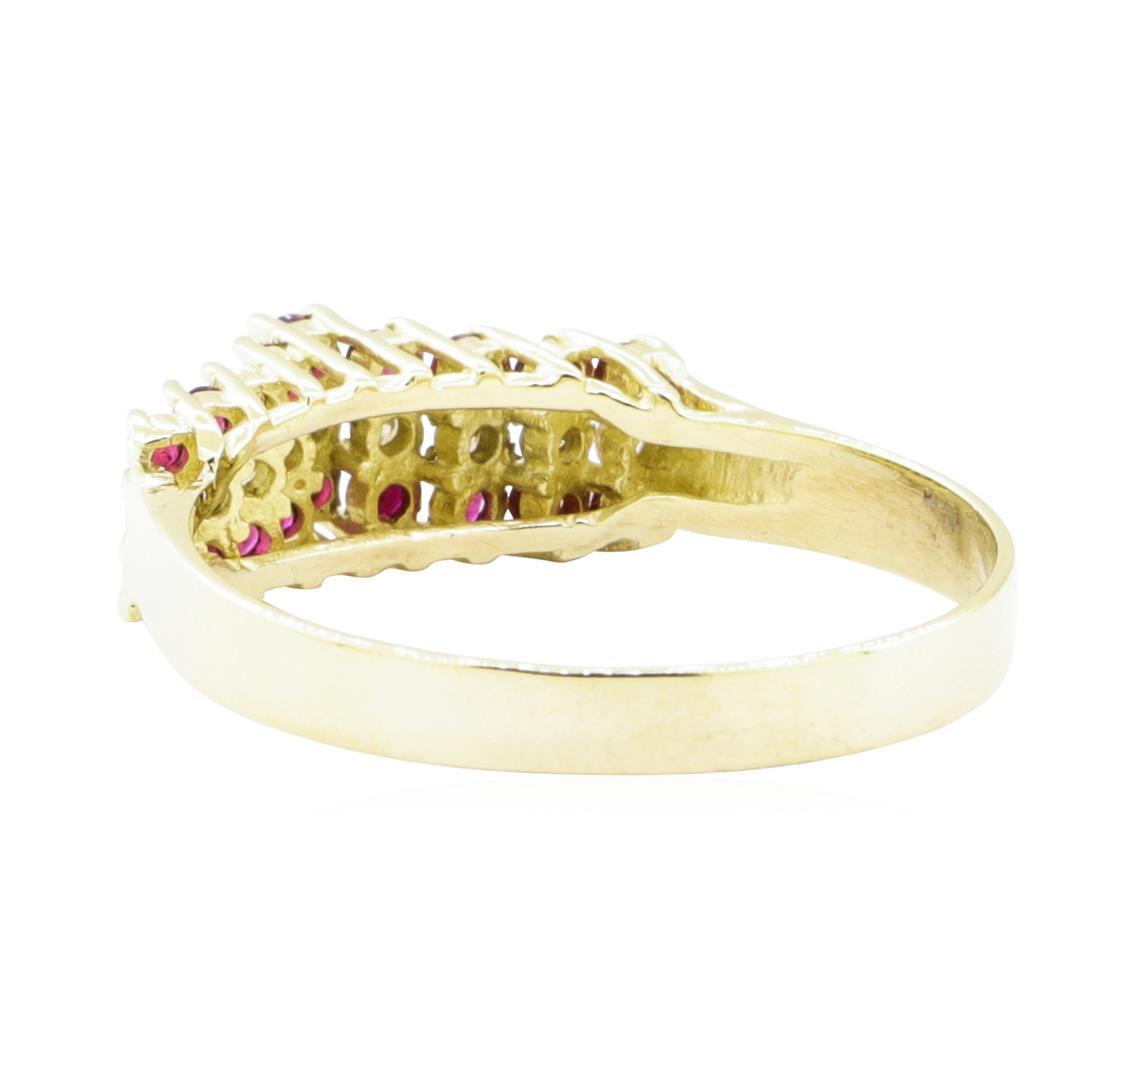 0.70 ctw Ruby and Diamond Ring - 14KT Yellow Gold